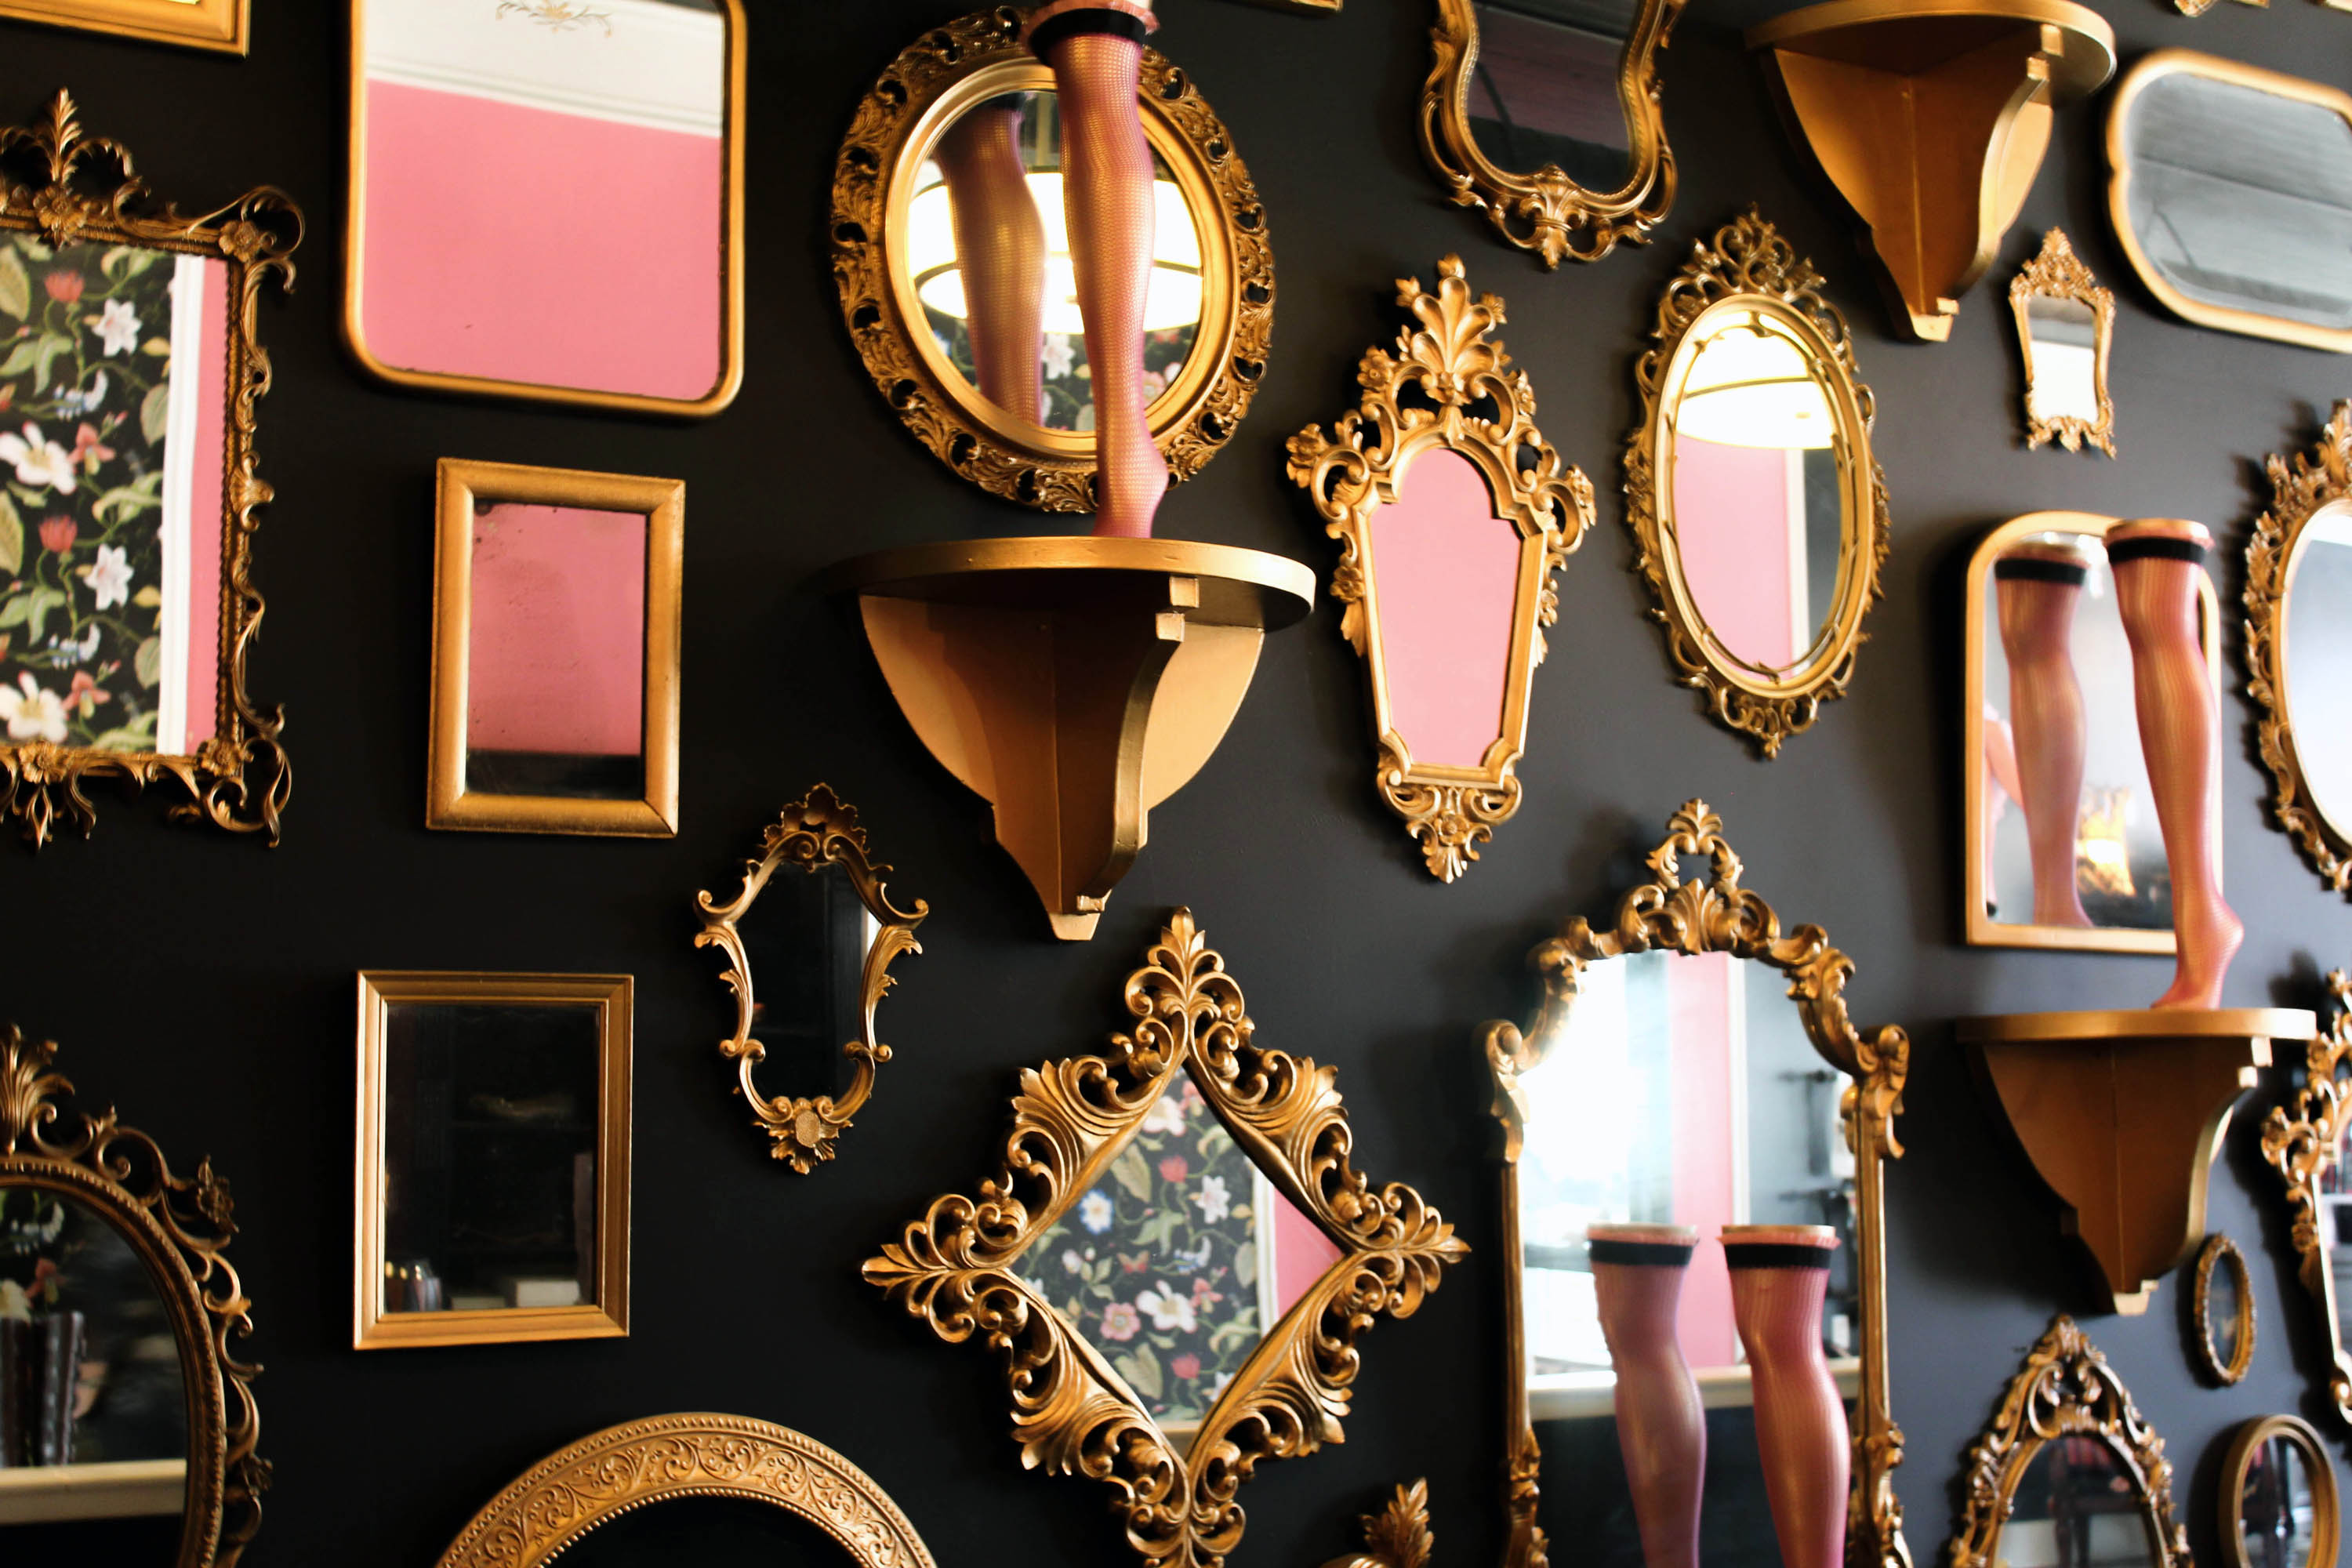 A wall of gold-painted mirrors adds character and creative flair to Kick's design.